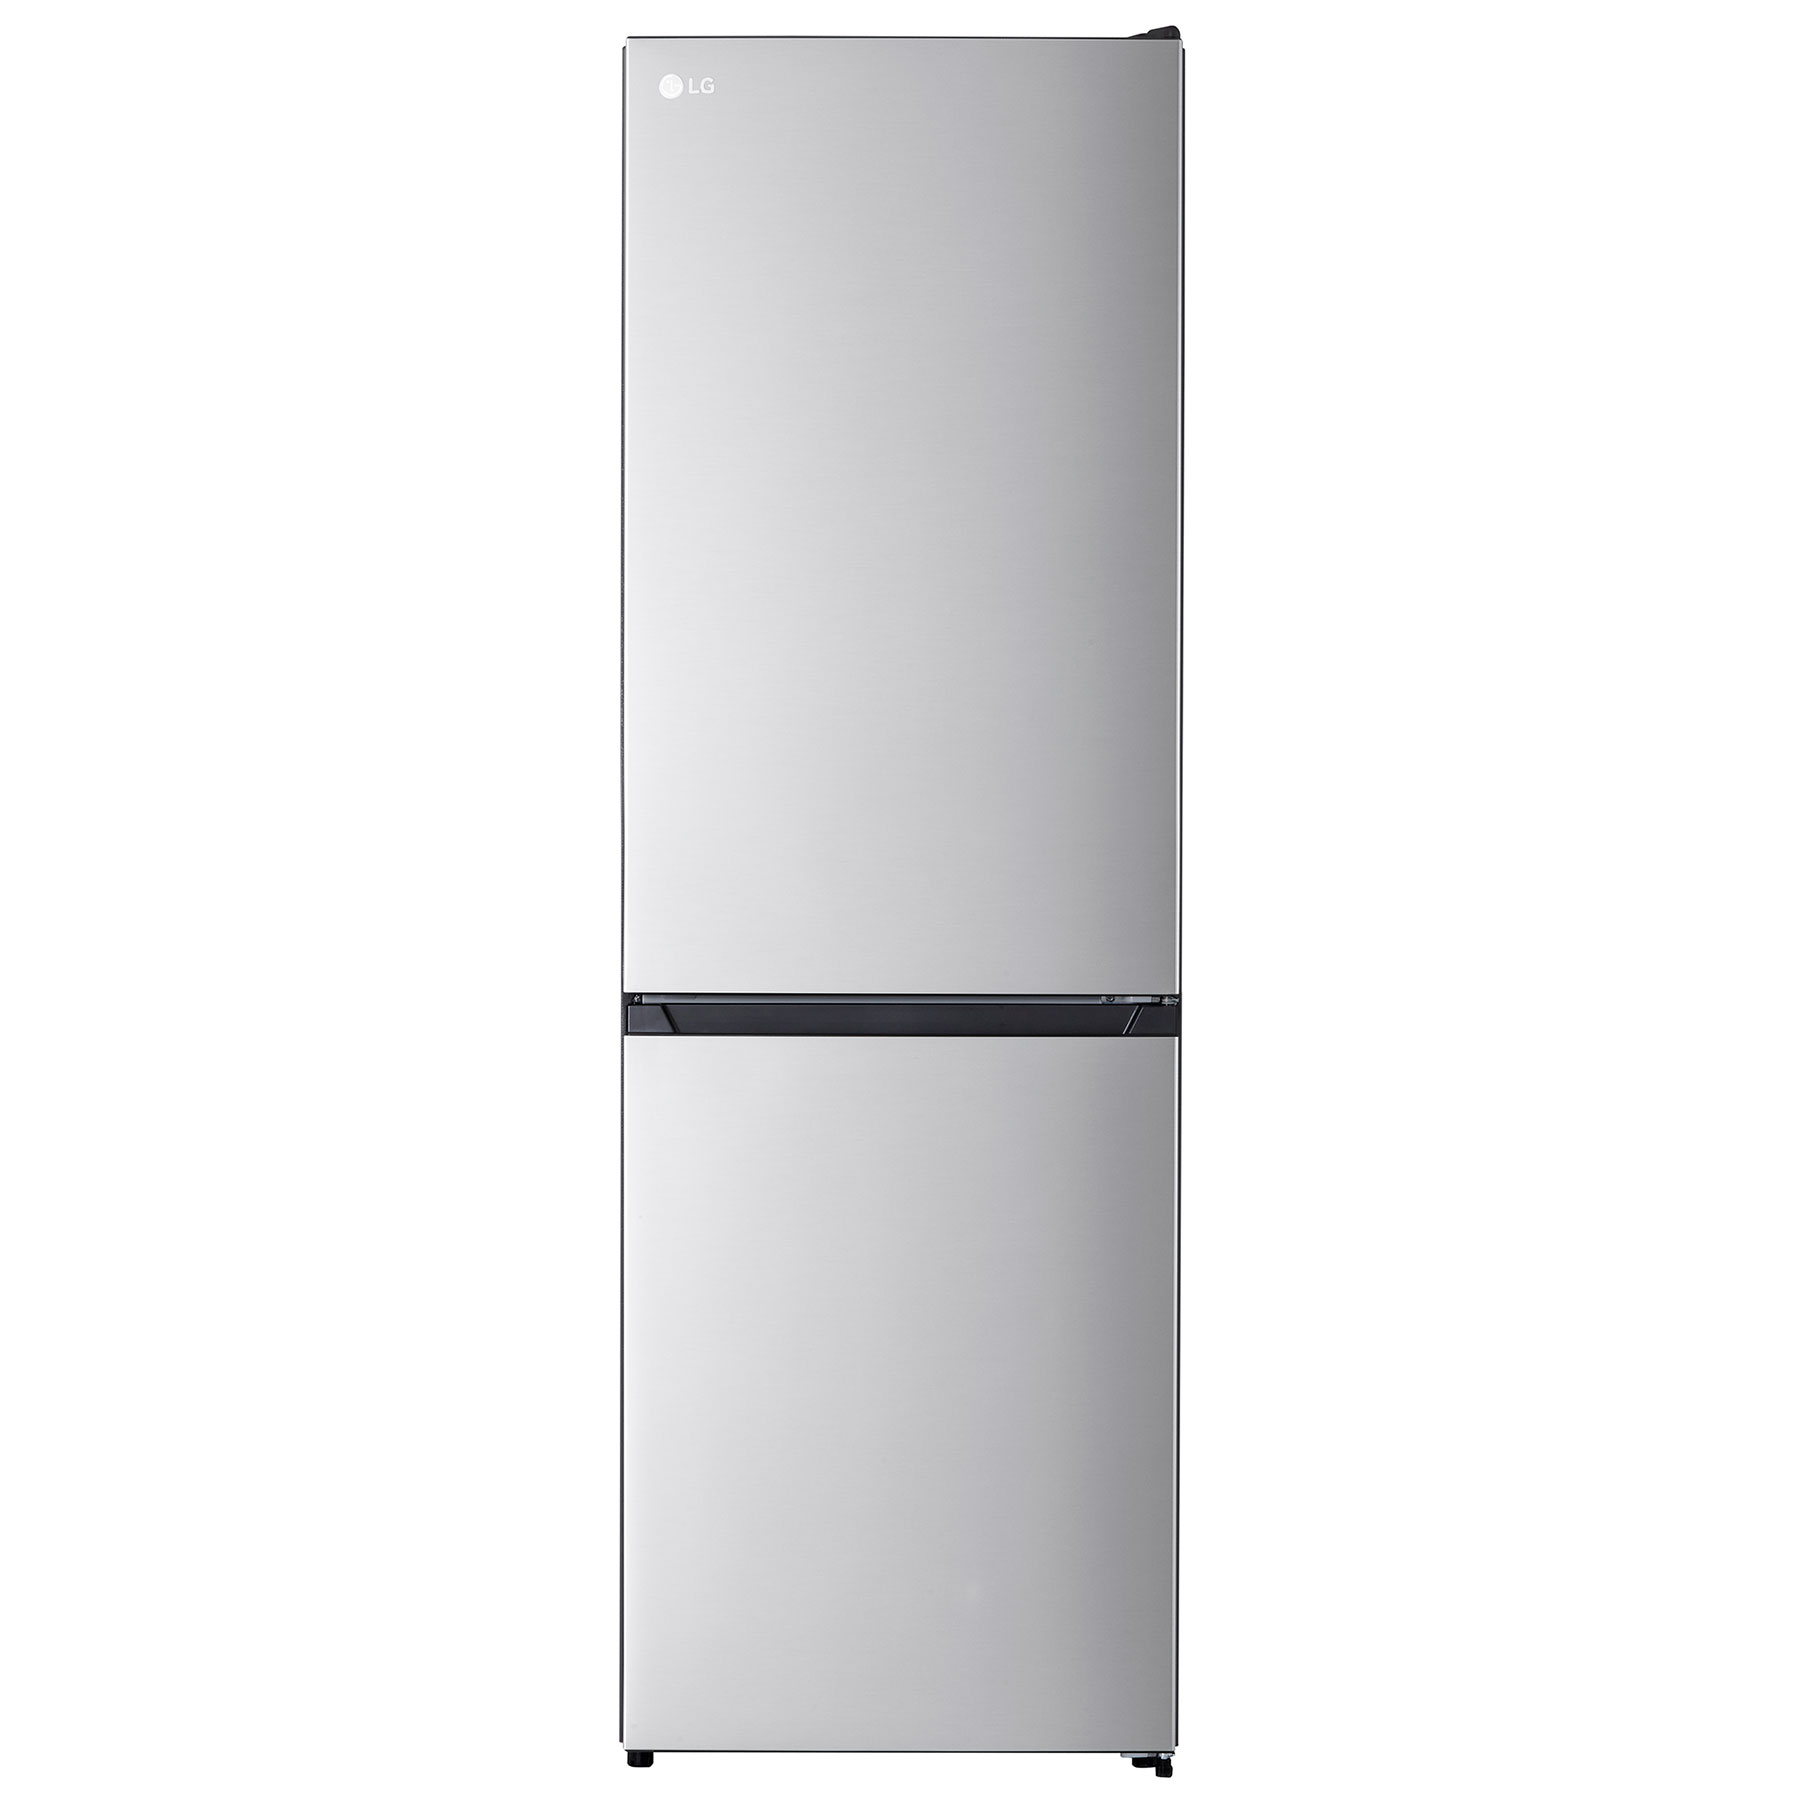 Image of LG GBM21HSADH 60cm Frost Free Fridge Freezer in Silver 1 86m D Rated